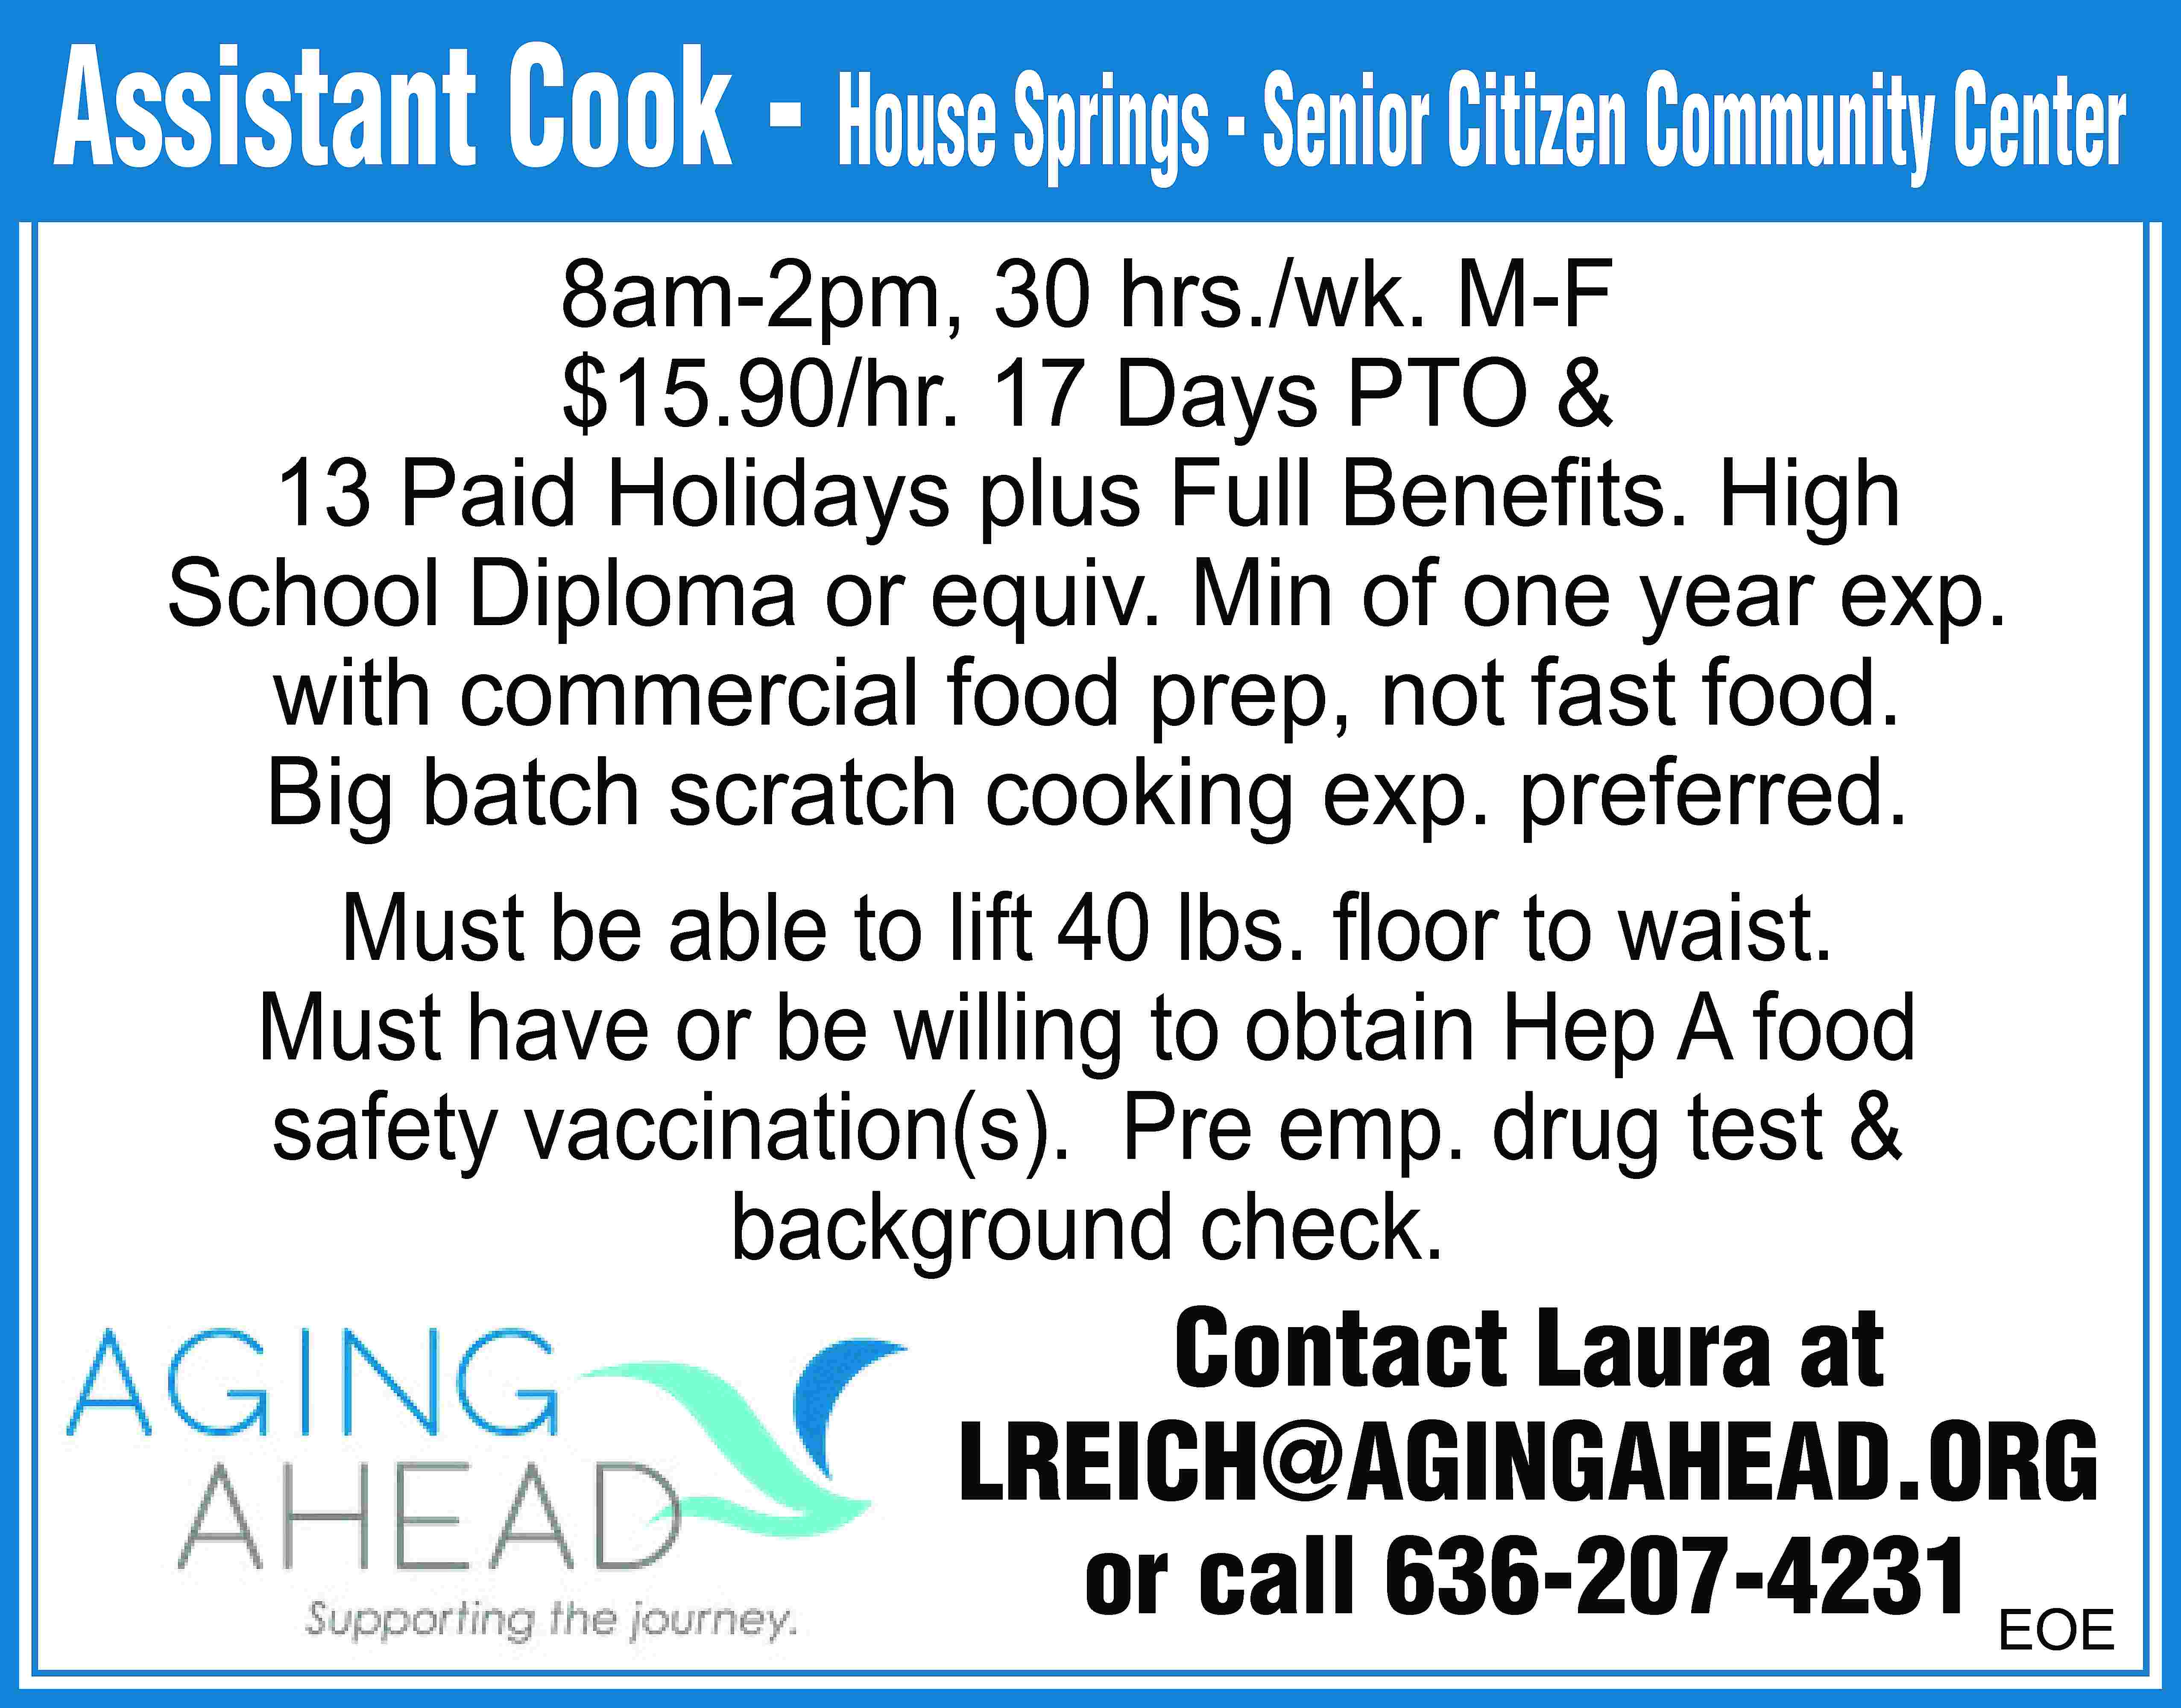 Assistant Cook - House Springs  Assistant Cook - House Springs - Senior Citizen Community Center 8am-2pm, 30 hrs./wk. M-F $15.90/hr. 17 Days PTO & 13 Paid Holidays plus Full Beneﬁts. High School Diploma or equiv. Min of one year exp. with commercial food prep, not fast food. Big batch scratch cooking exp. preferred. Must be able to lift 40 lbs. ﬂoor to waist. Must have or be willing to obtain Hep A food safety vaccination(s). Pre emp. drug test & background check. Contact Laura at LREICH@AGINGAHEAD.ORG or call 636-207-4231 EOE